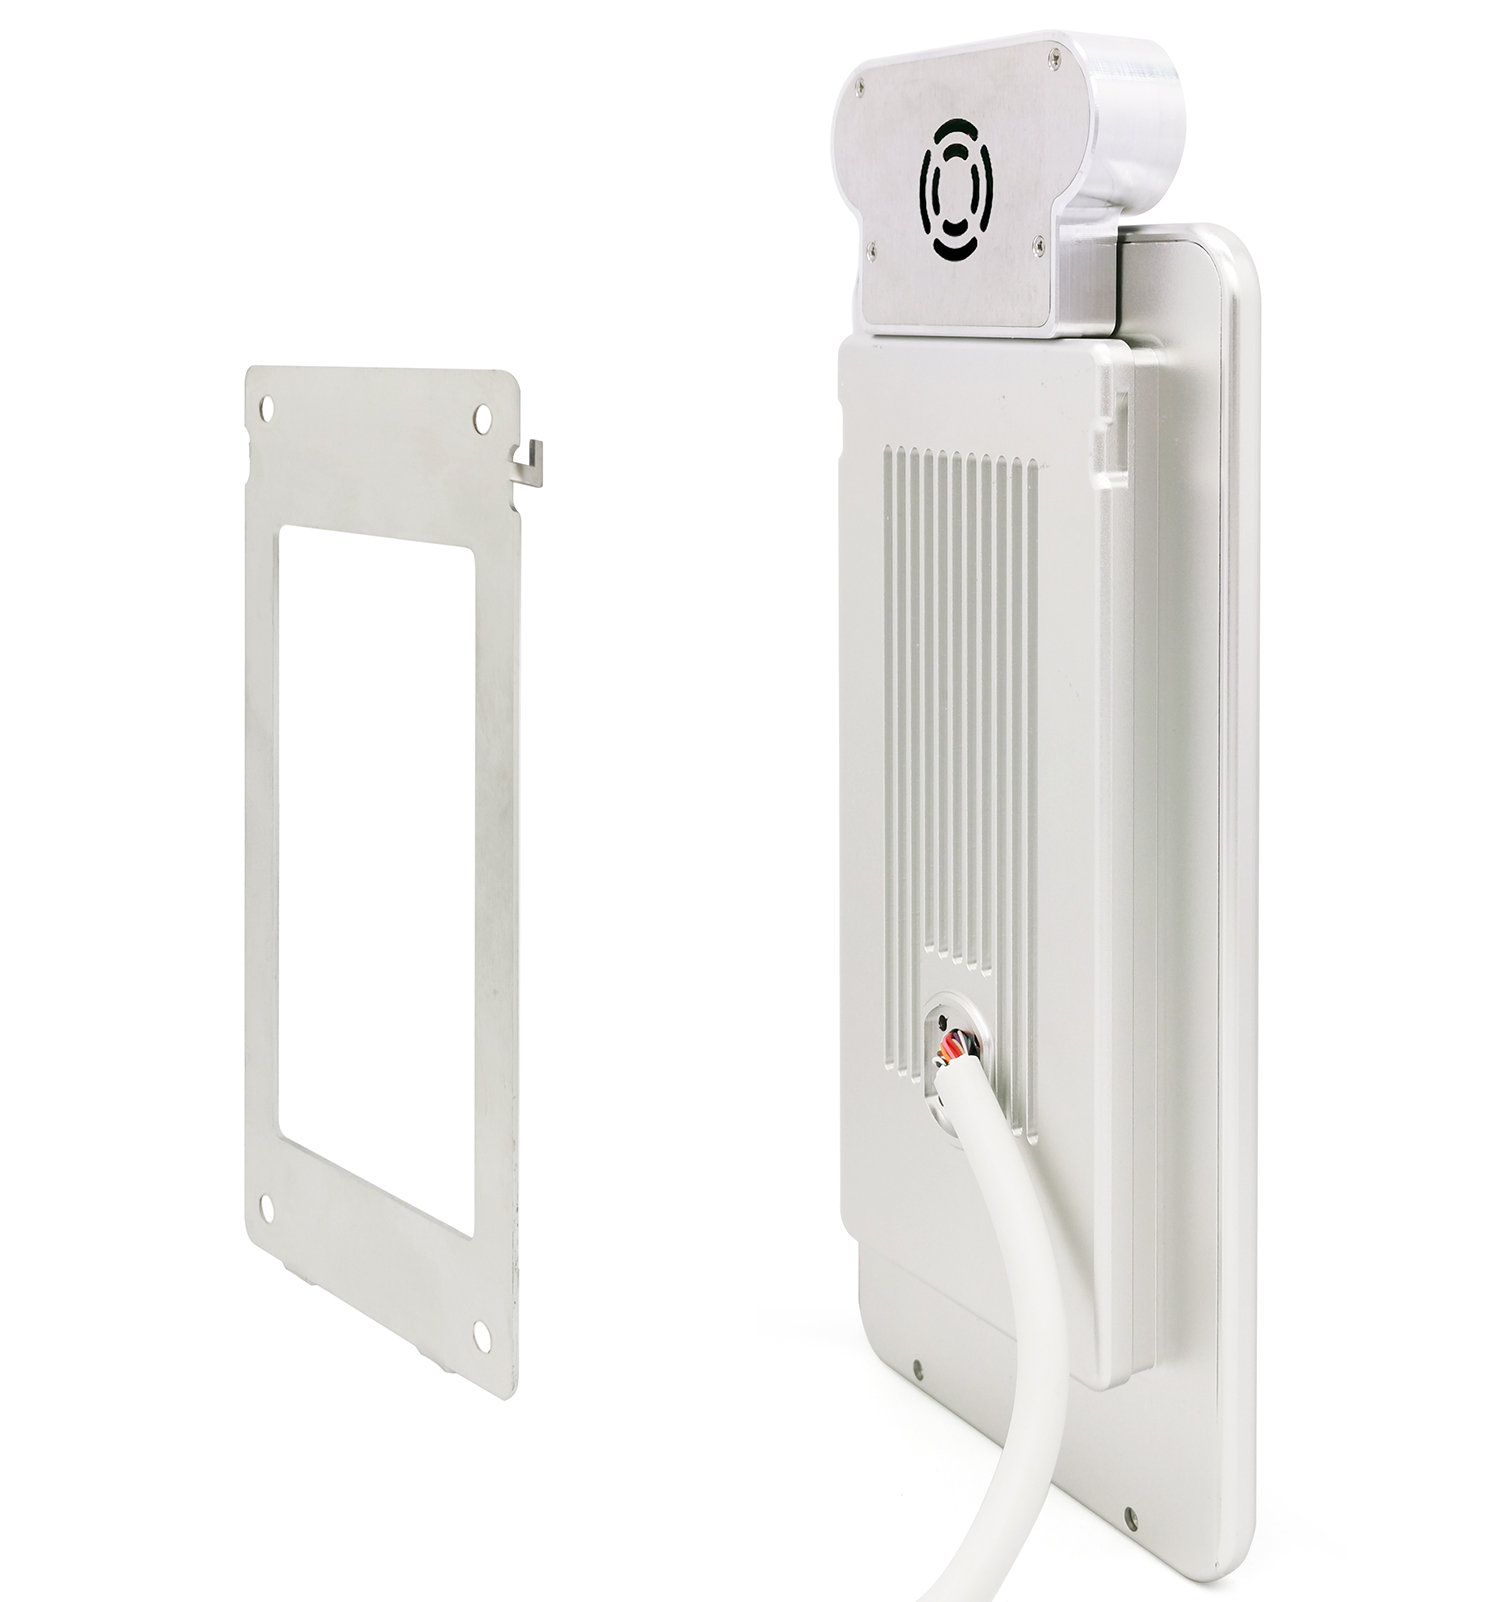 Wall Mounted Type Face Recognition Device ine Boby Temperature Detection (5)